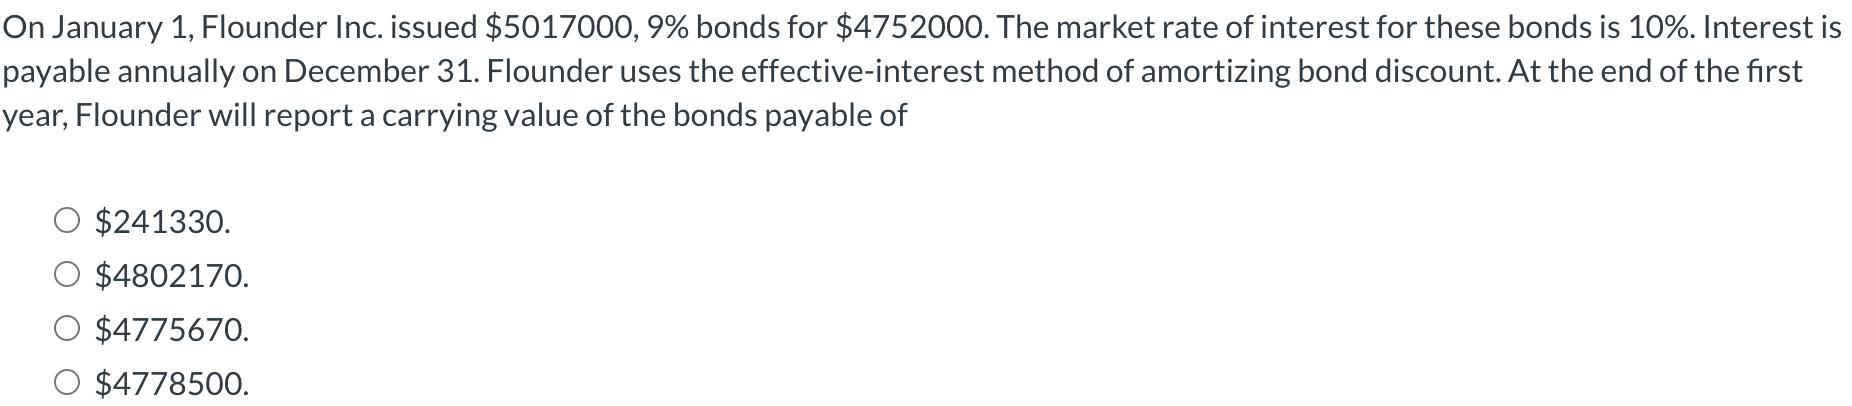 On January 1, Flounder Inc. issued $5017000, 9% bonds for $4752000. The market rate of interest for these